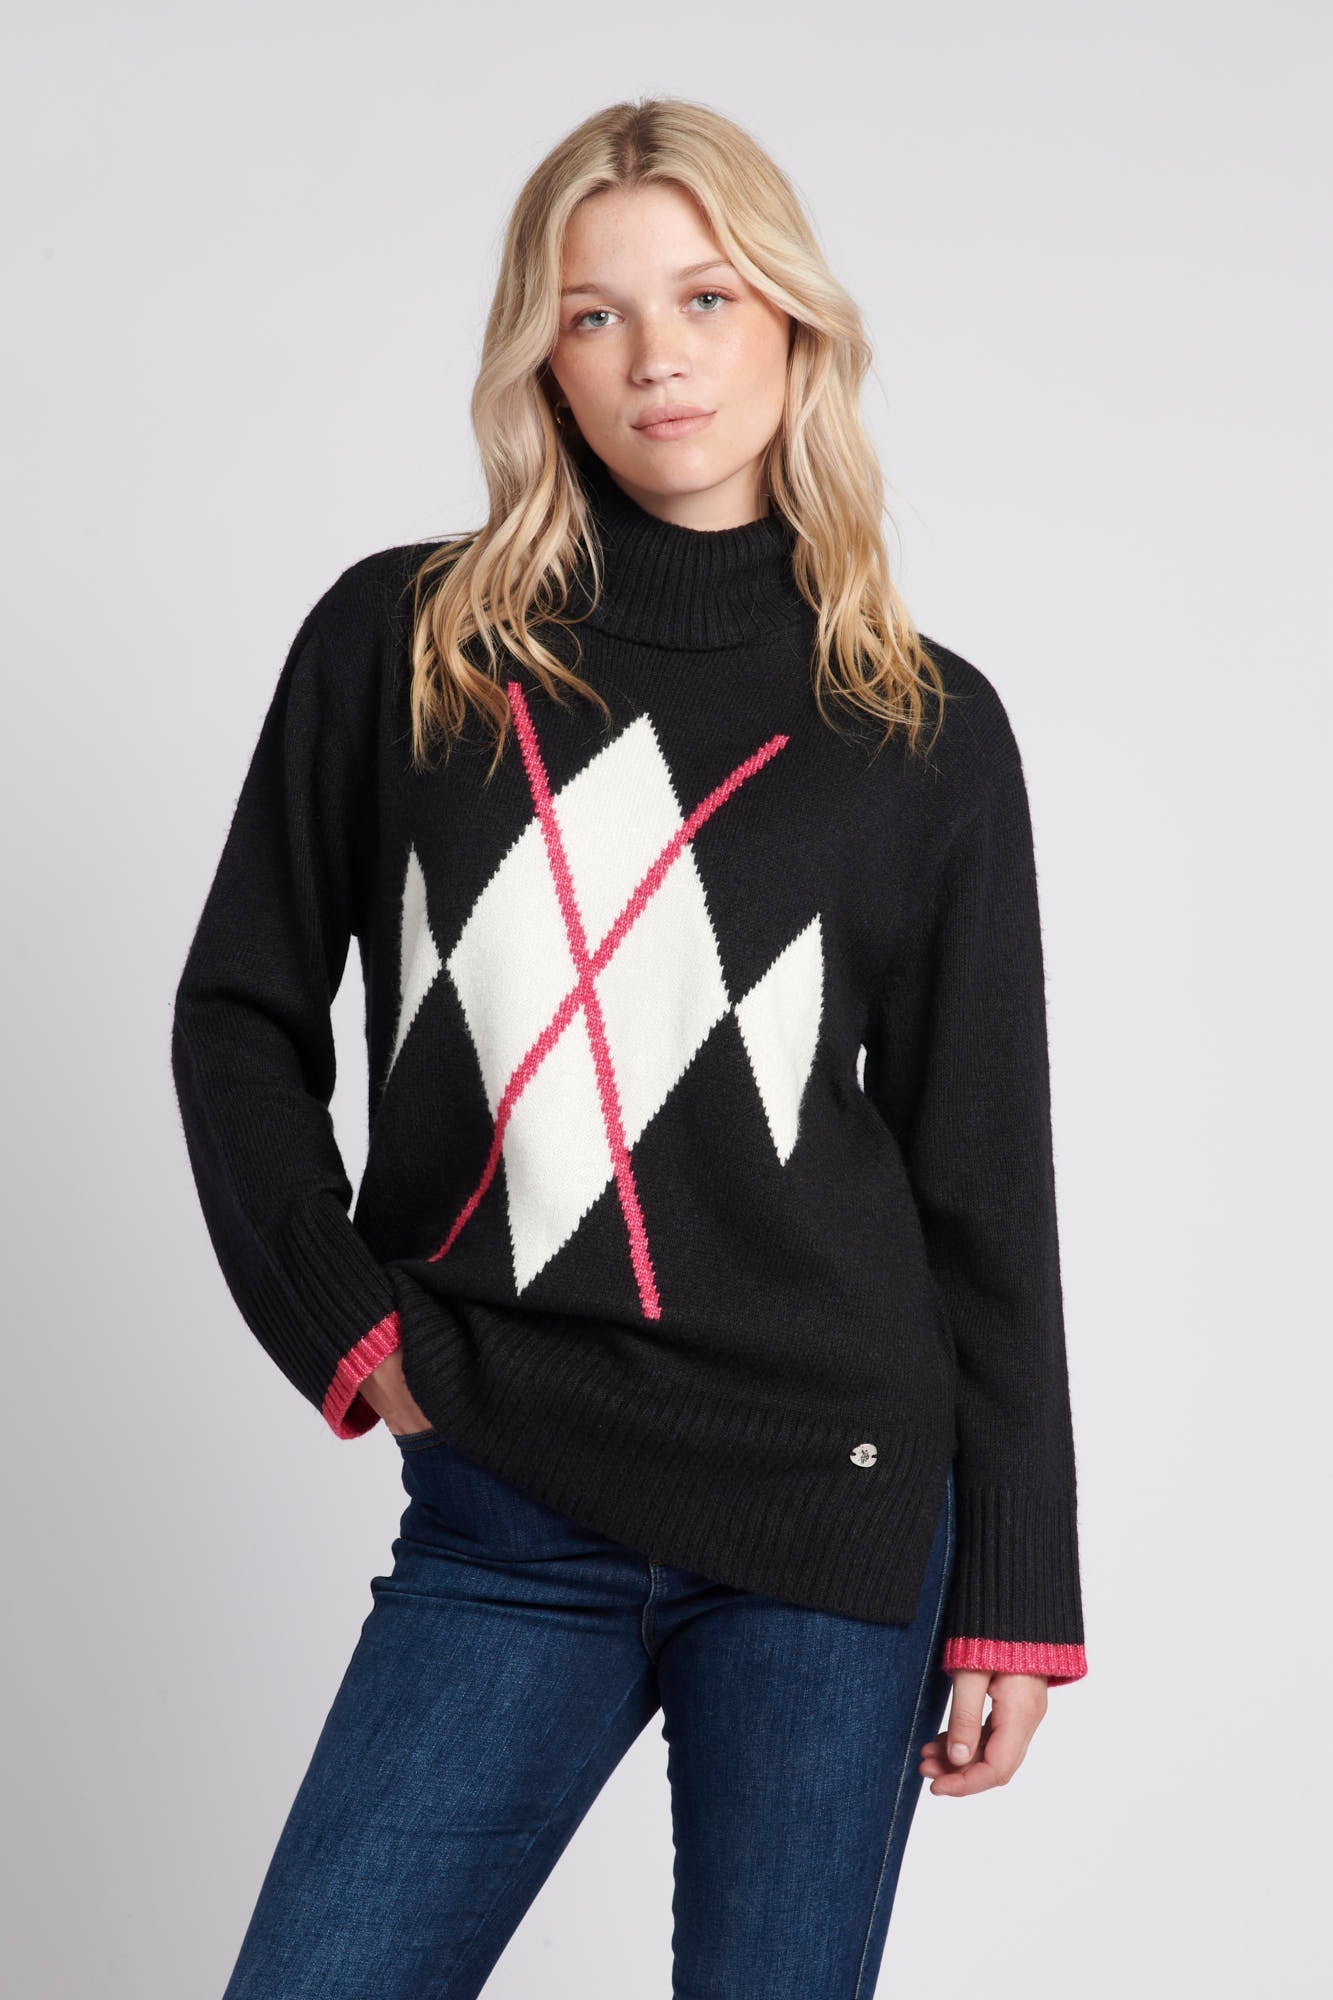 U.S. Polo Assn. Womens Argyle Roll Neck Knitted Jumper in Black